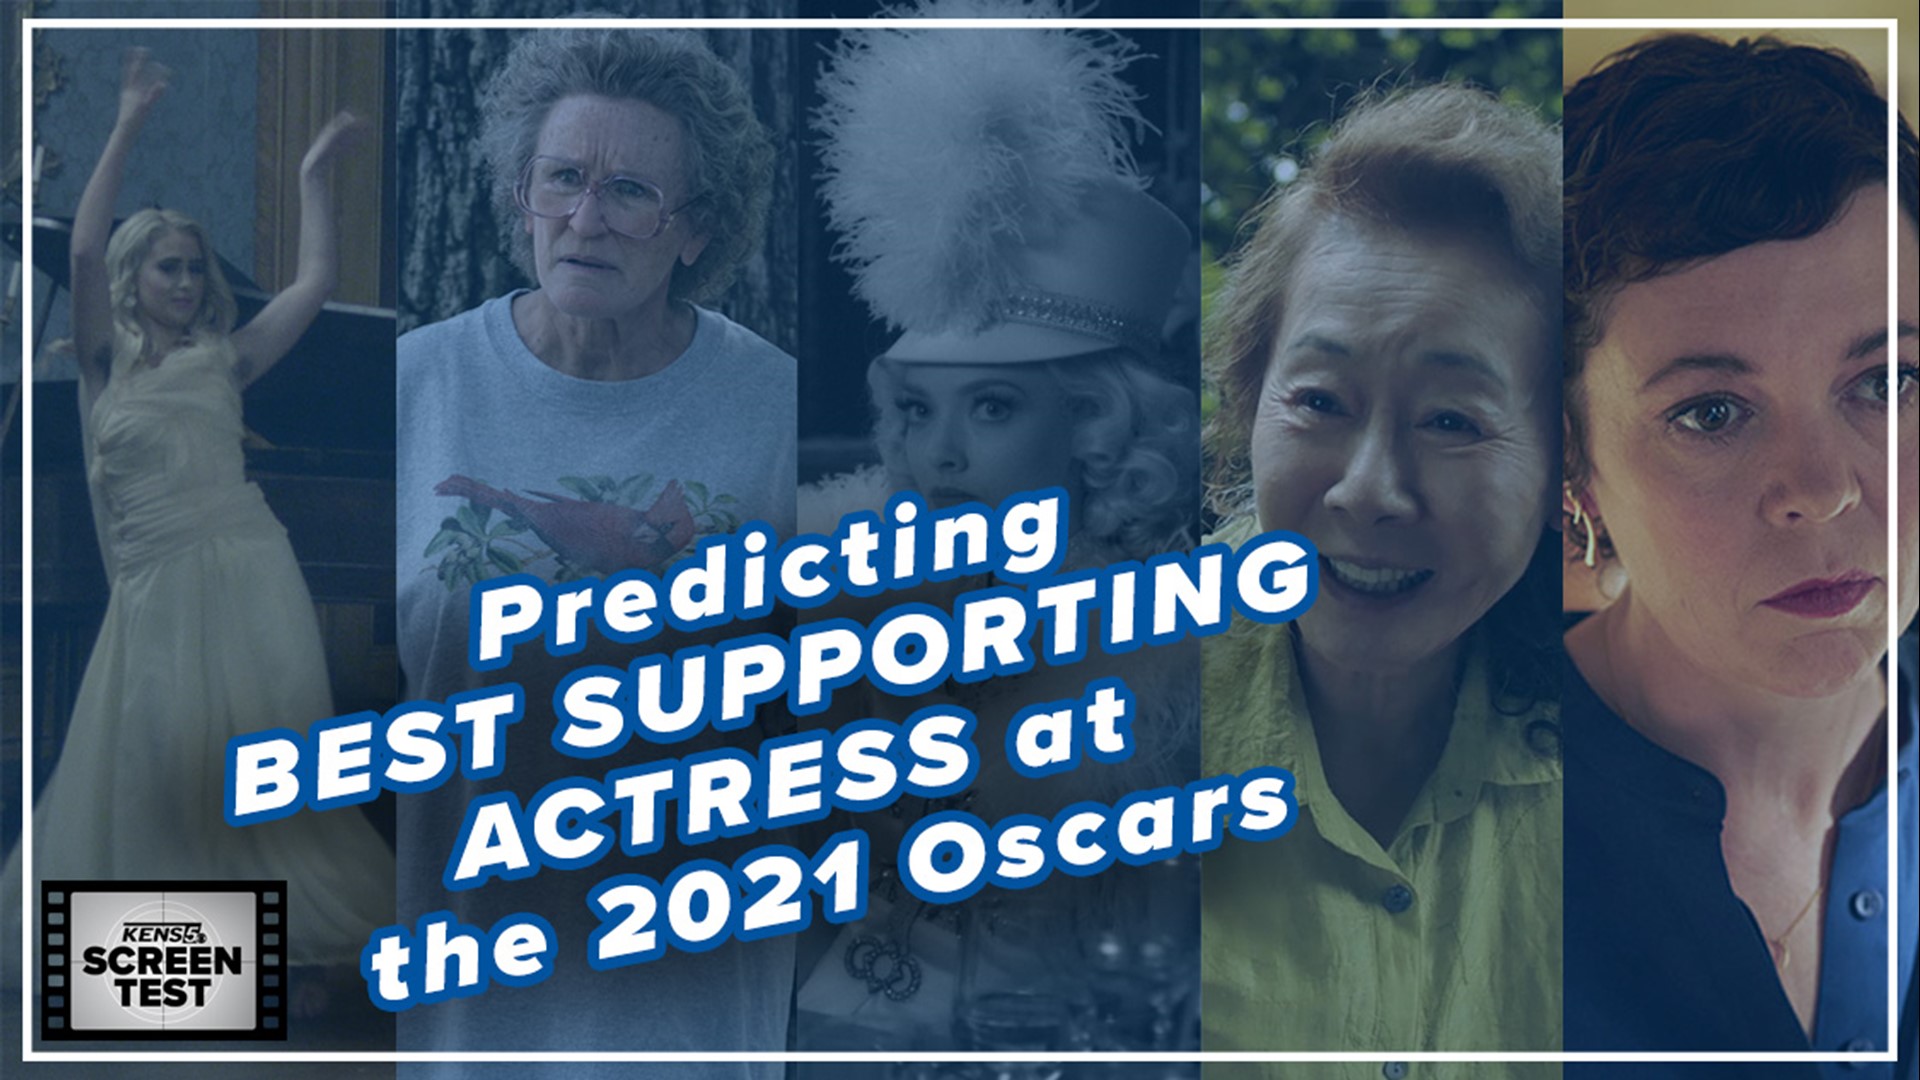 KENS 5's David Lynch and Jackson Floyd break down one of the most intriguing races ahead of the 2021 Oscars.